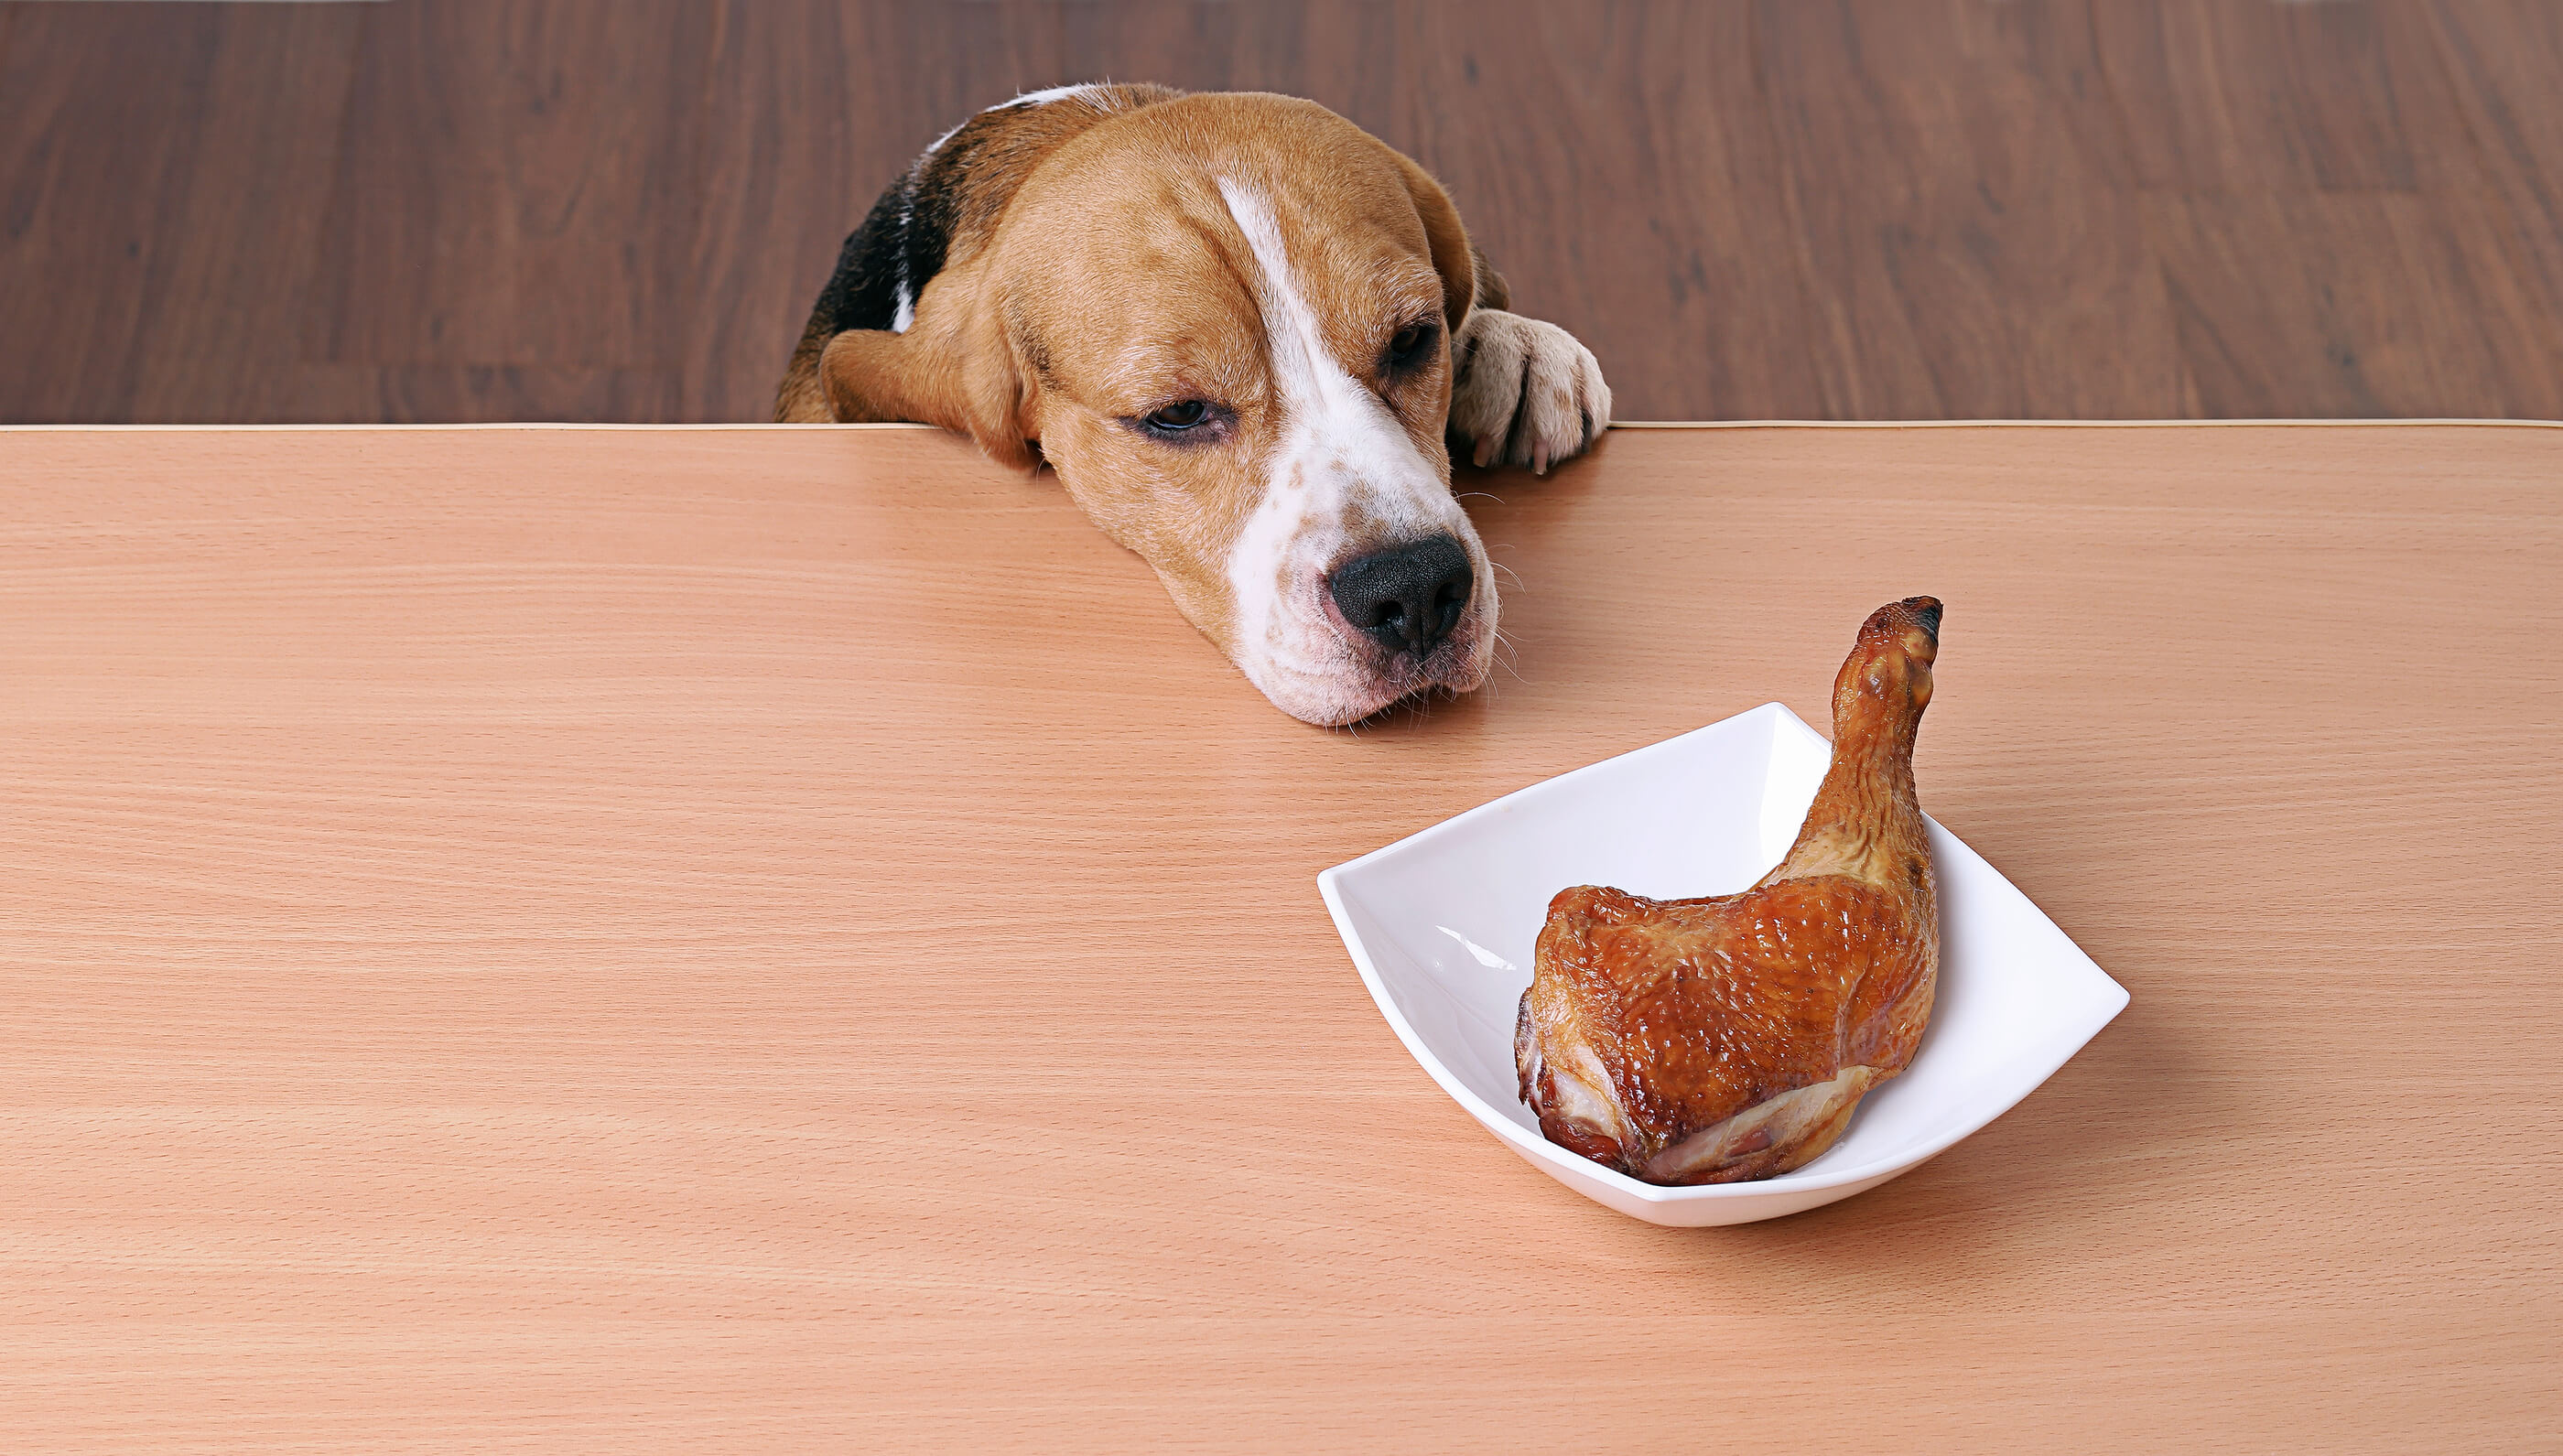 dog in front of a plate with a chicken leg on it